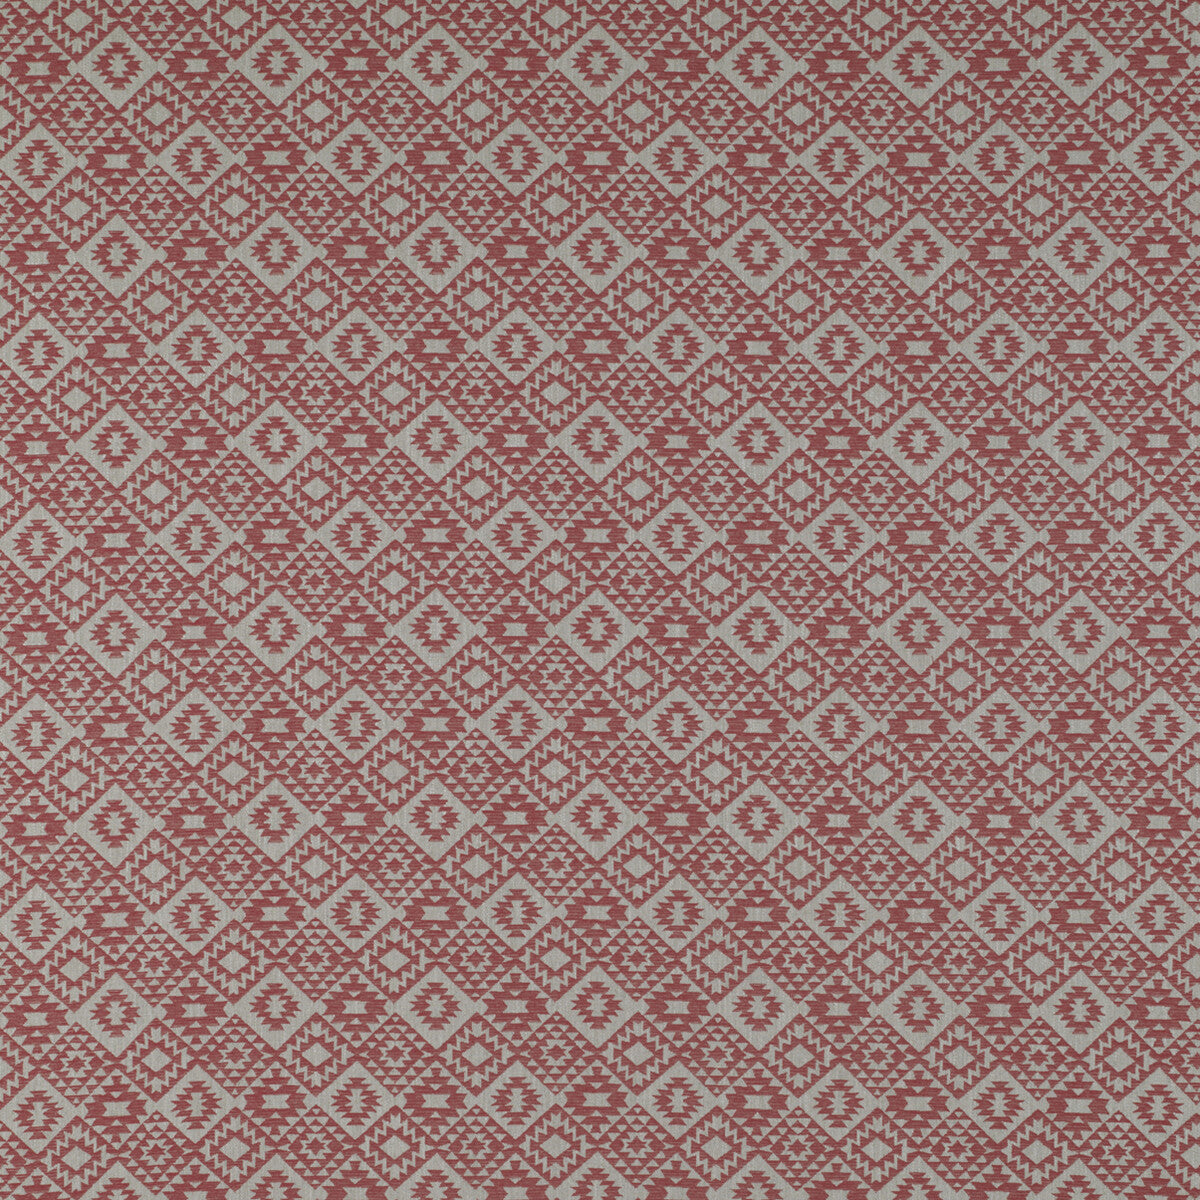 Lecco fabric in rojo color - pattern GDT5323.004.0 - by Gaston y Daniela in the Tierras collection